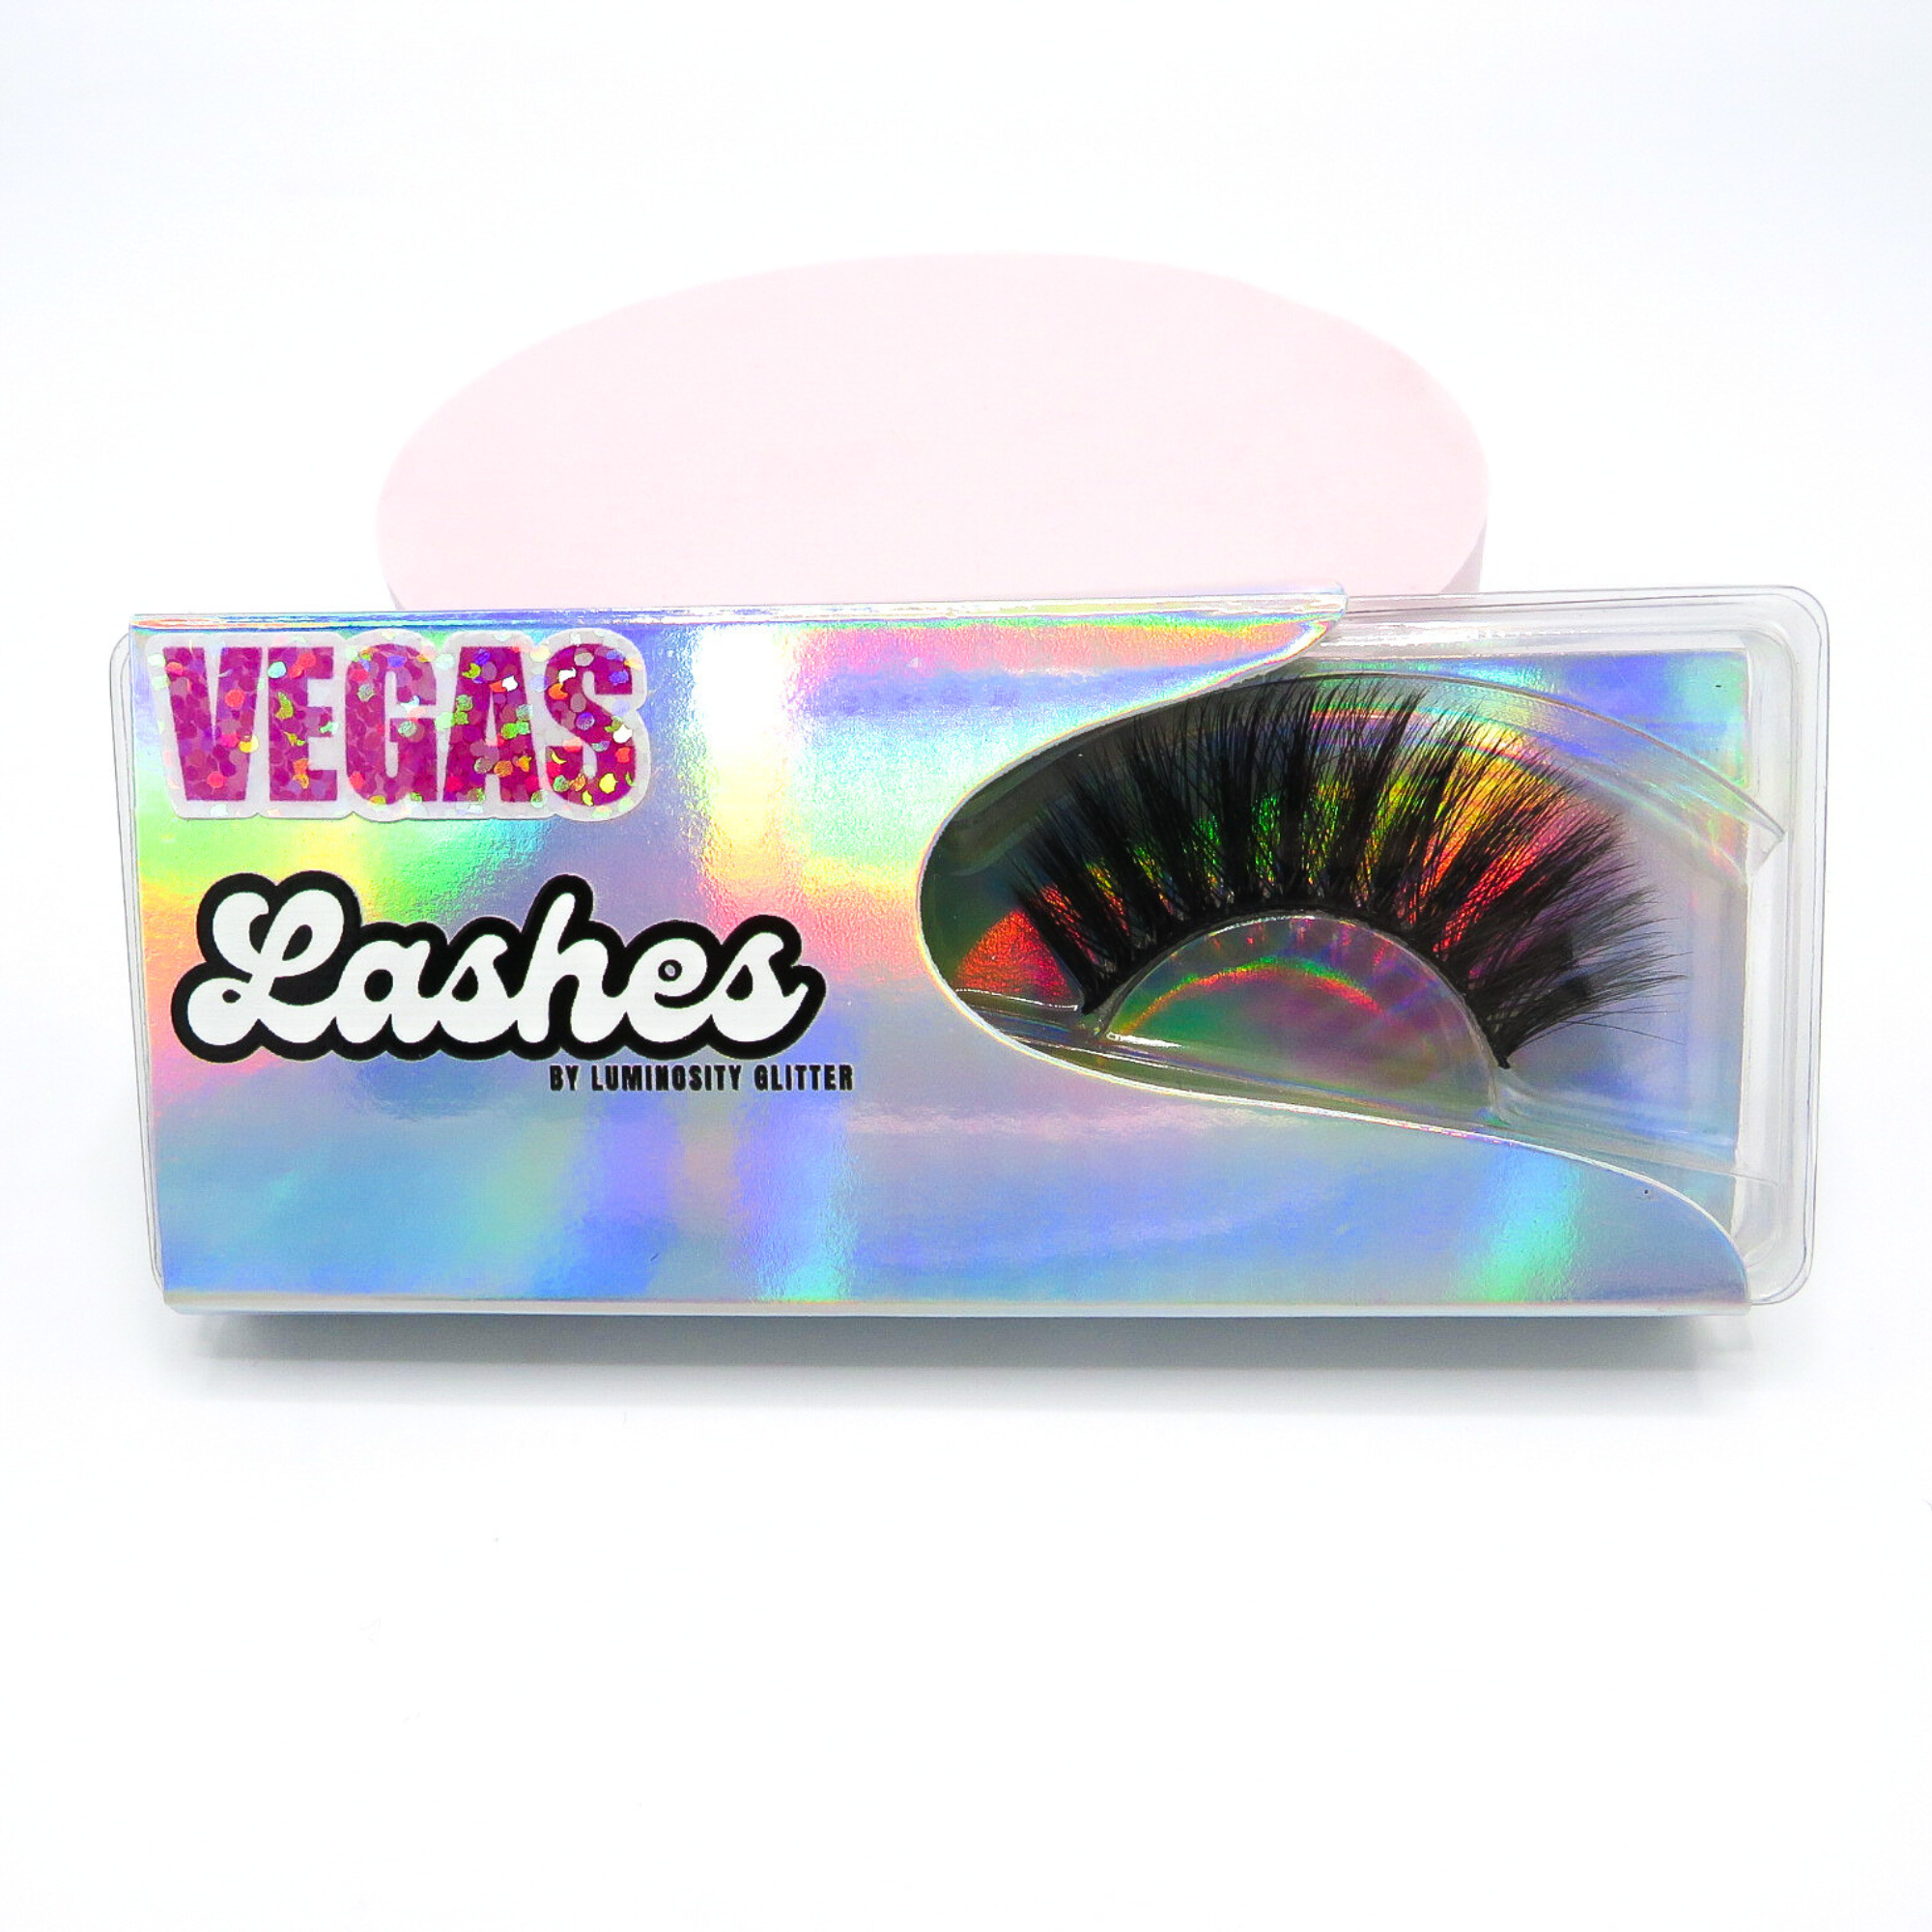 Vegas strip lashes by Luminosity Glitter. Faux Mink lashes.